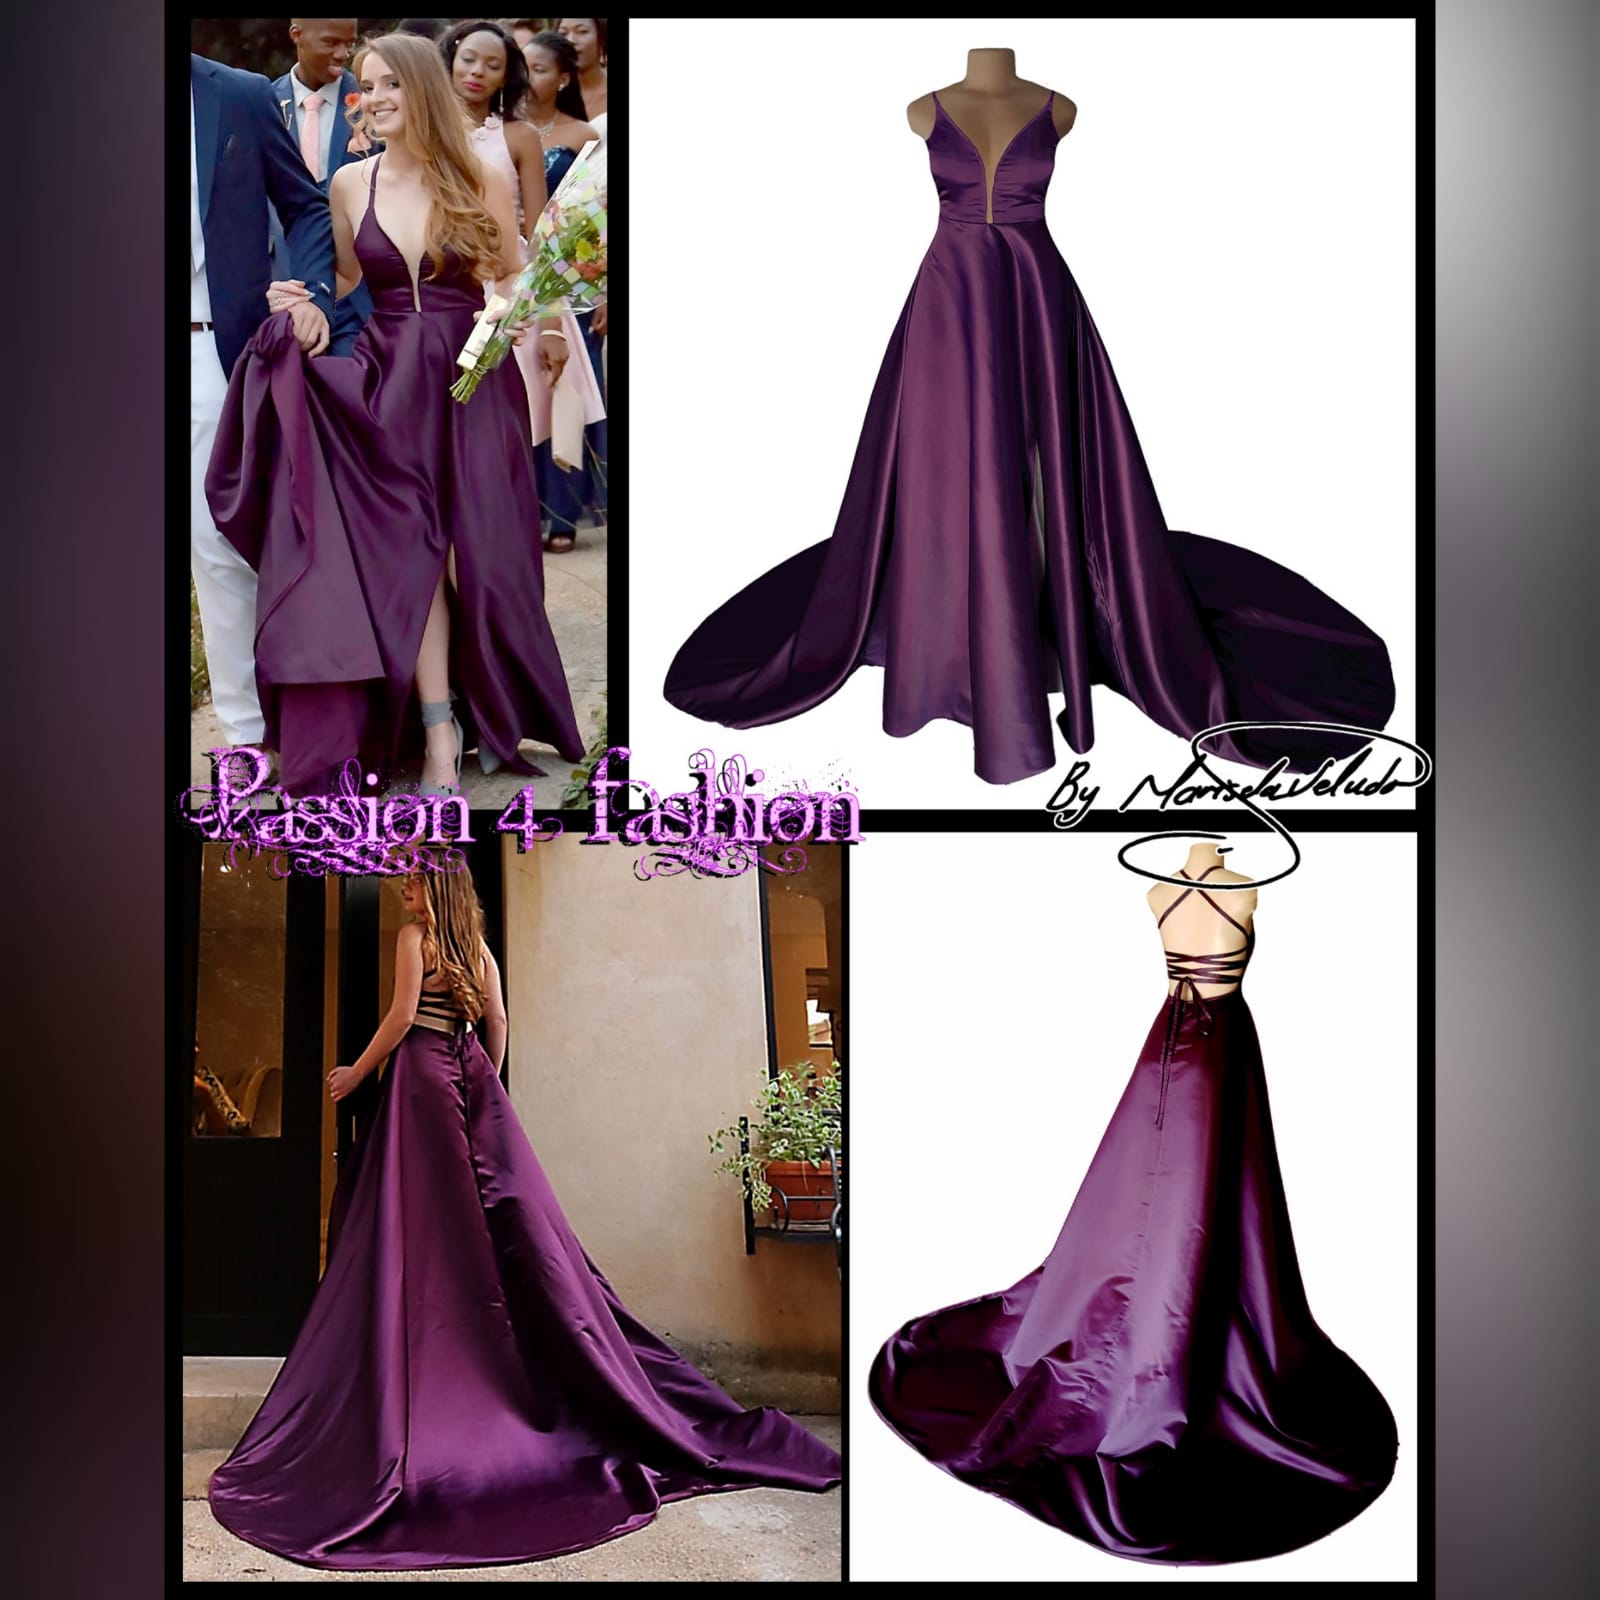 Plum long flowy prom dress with a plunging neckline 6 plum long flowy prom dress with a plunging neckline and a lace up open back with a slit and train.